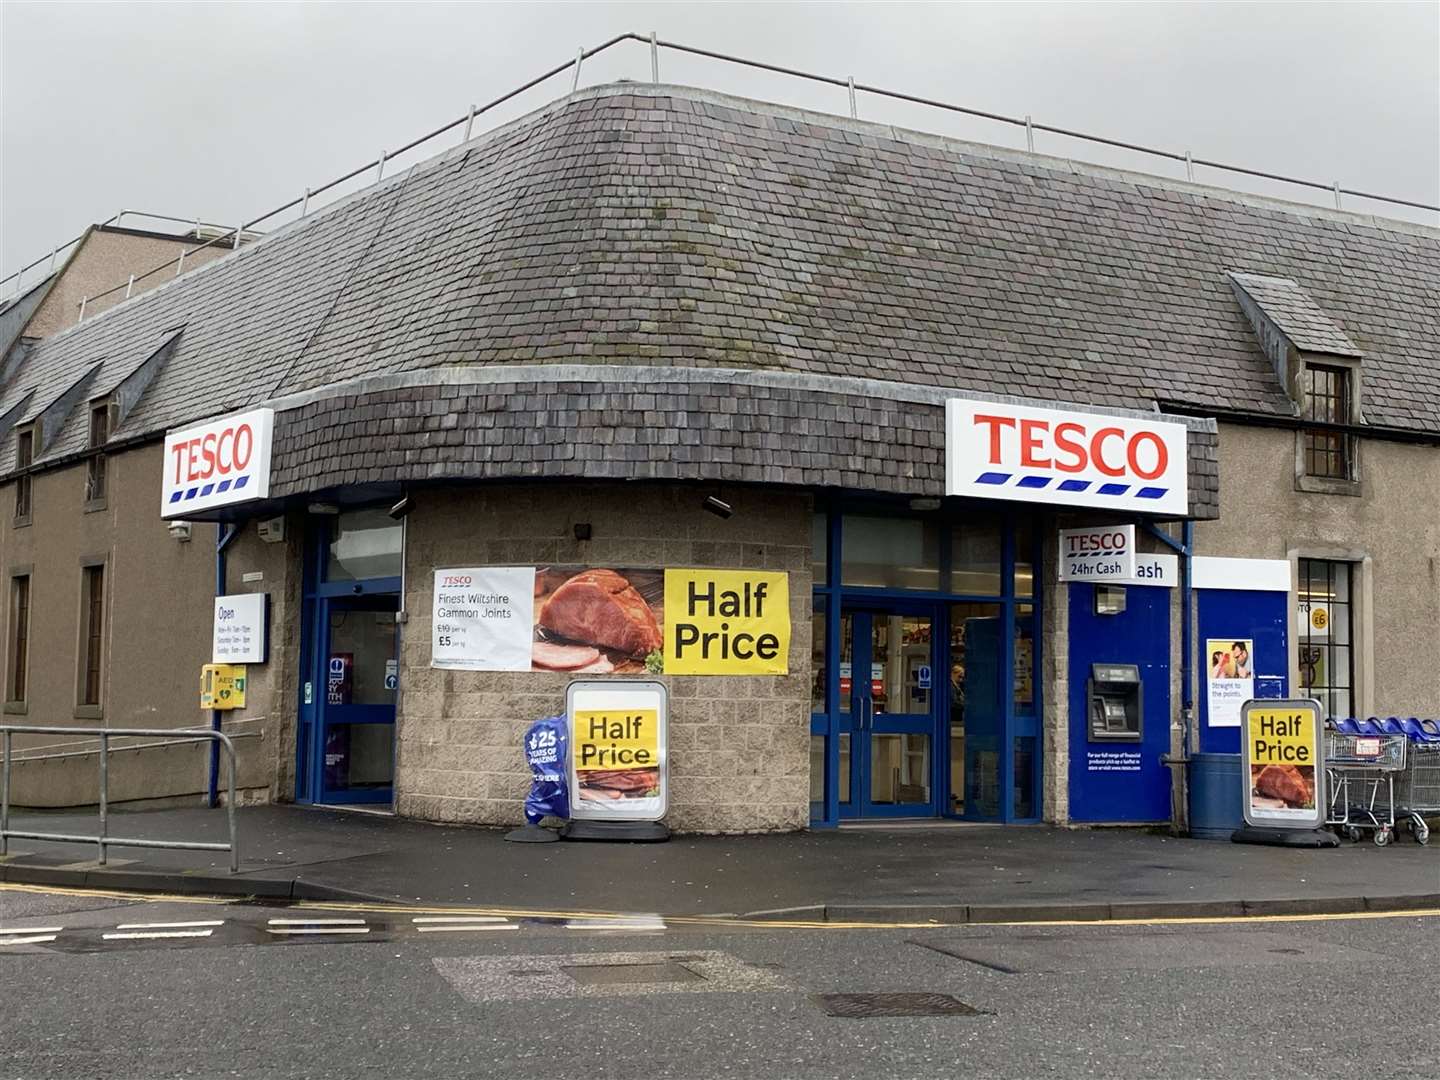 Banff and Macduff Community Council has voiced concerns over staff cuts at Banff Tesco.